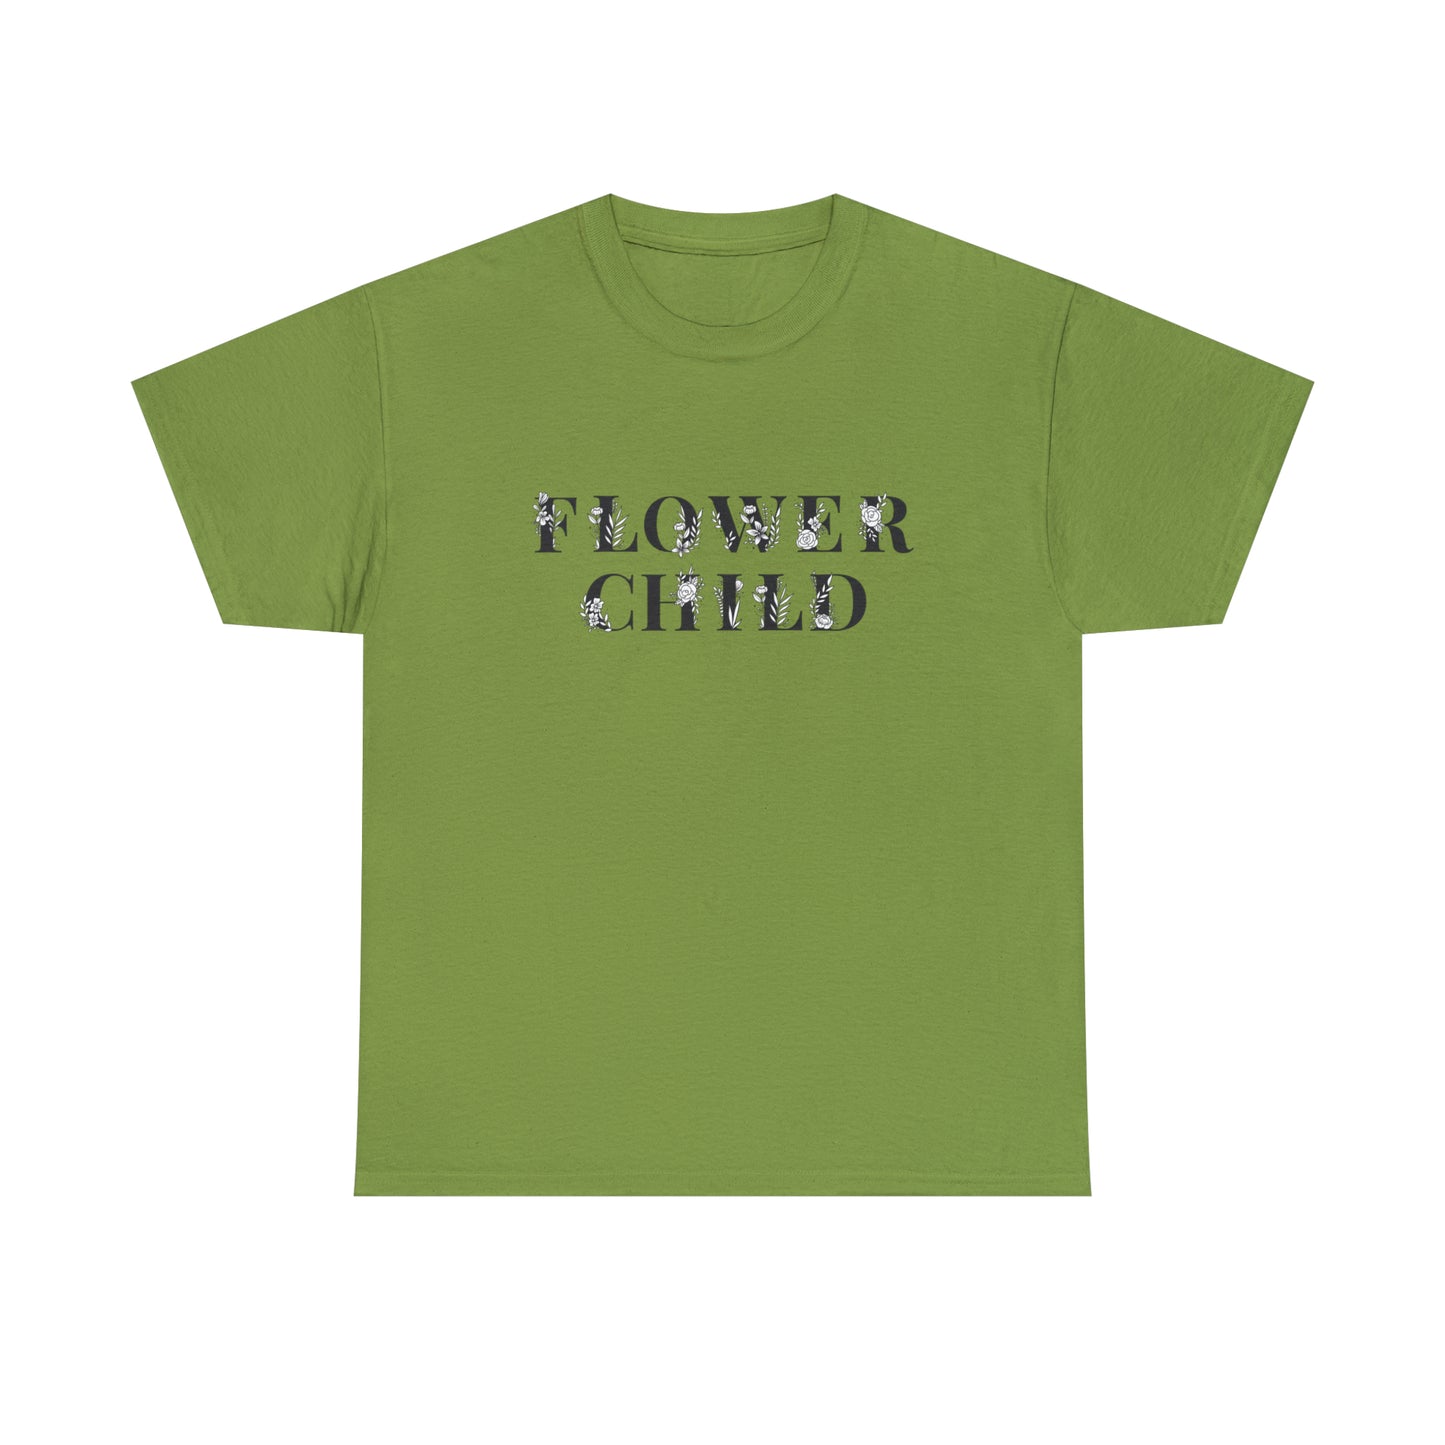 Floral T-Shirt For Flower Child T Shirt For Hippy TShirt Botanical T-Shirt For Woman Floral Lettering Shirt